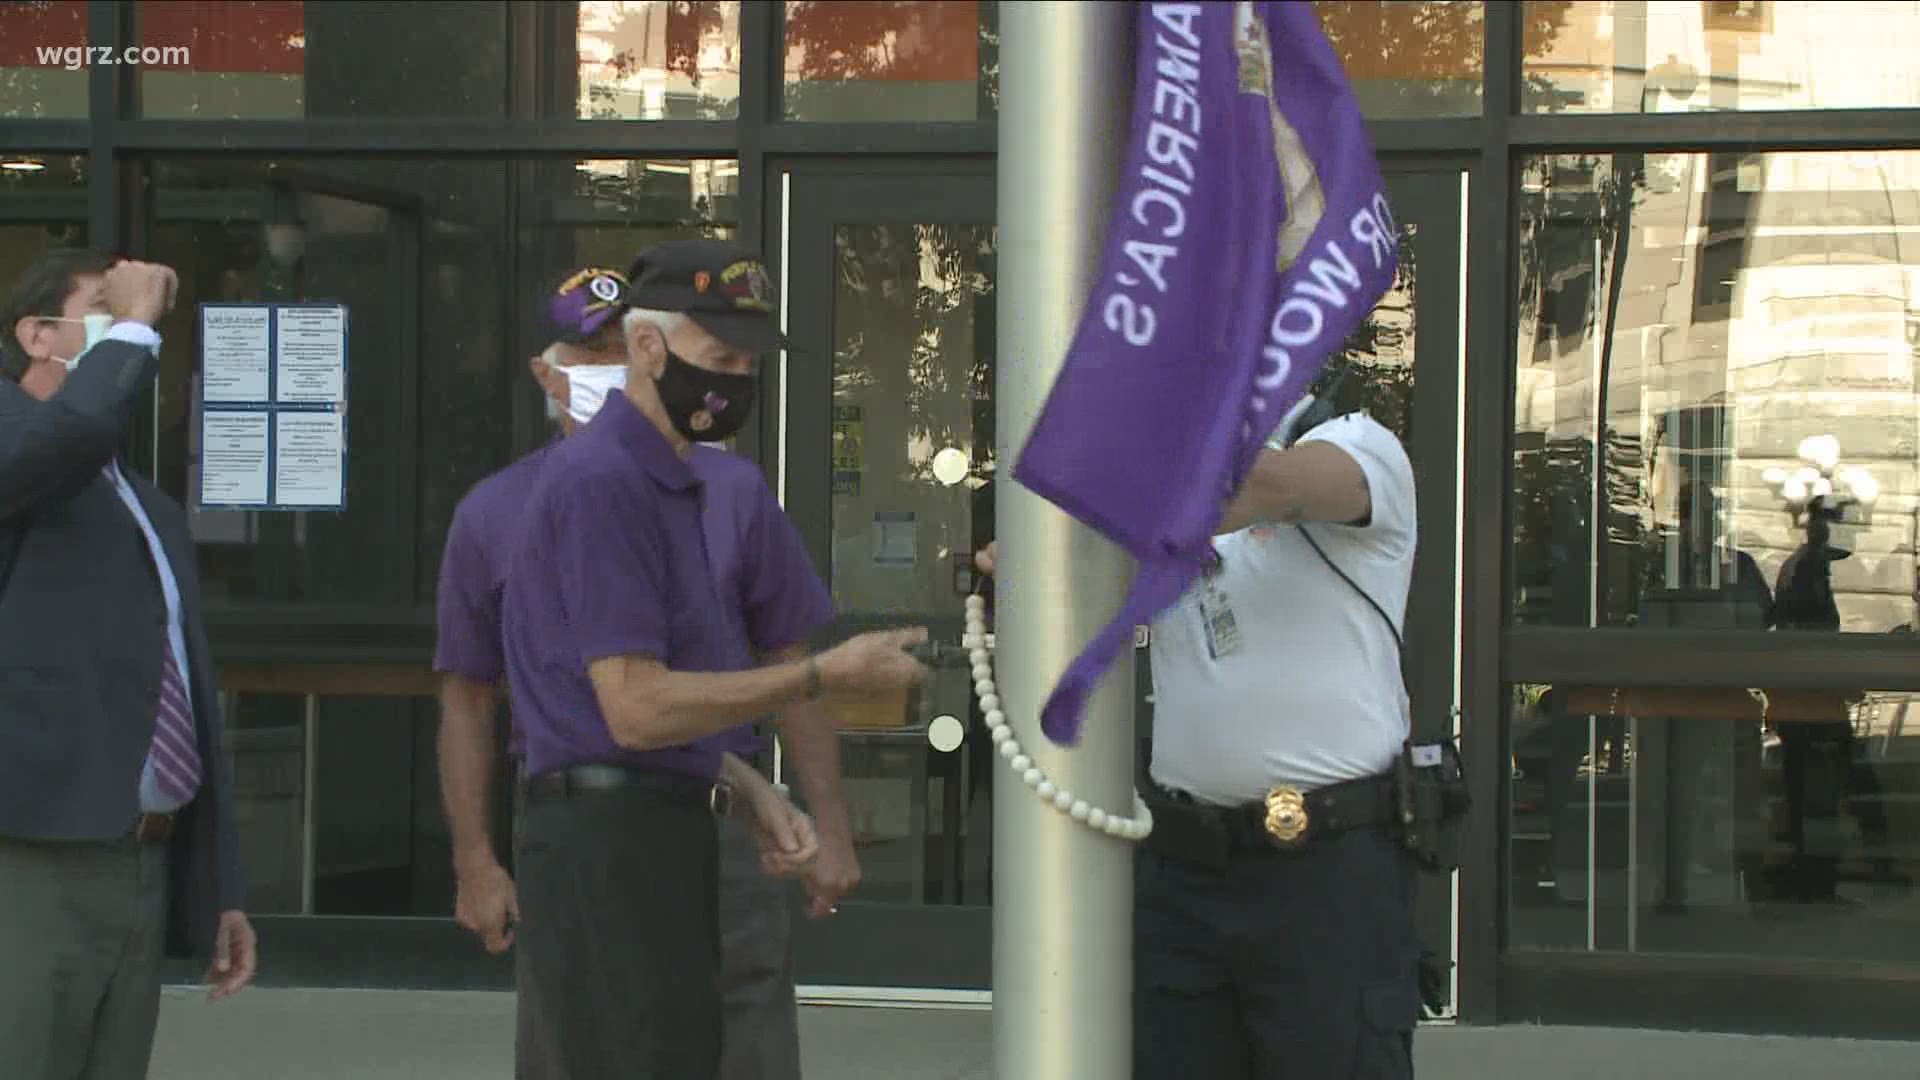 The purple heart flags will fly this weekend outside all erie county government buildings.